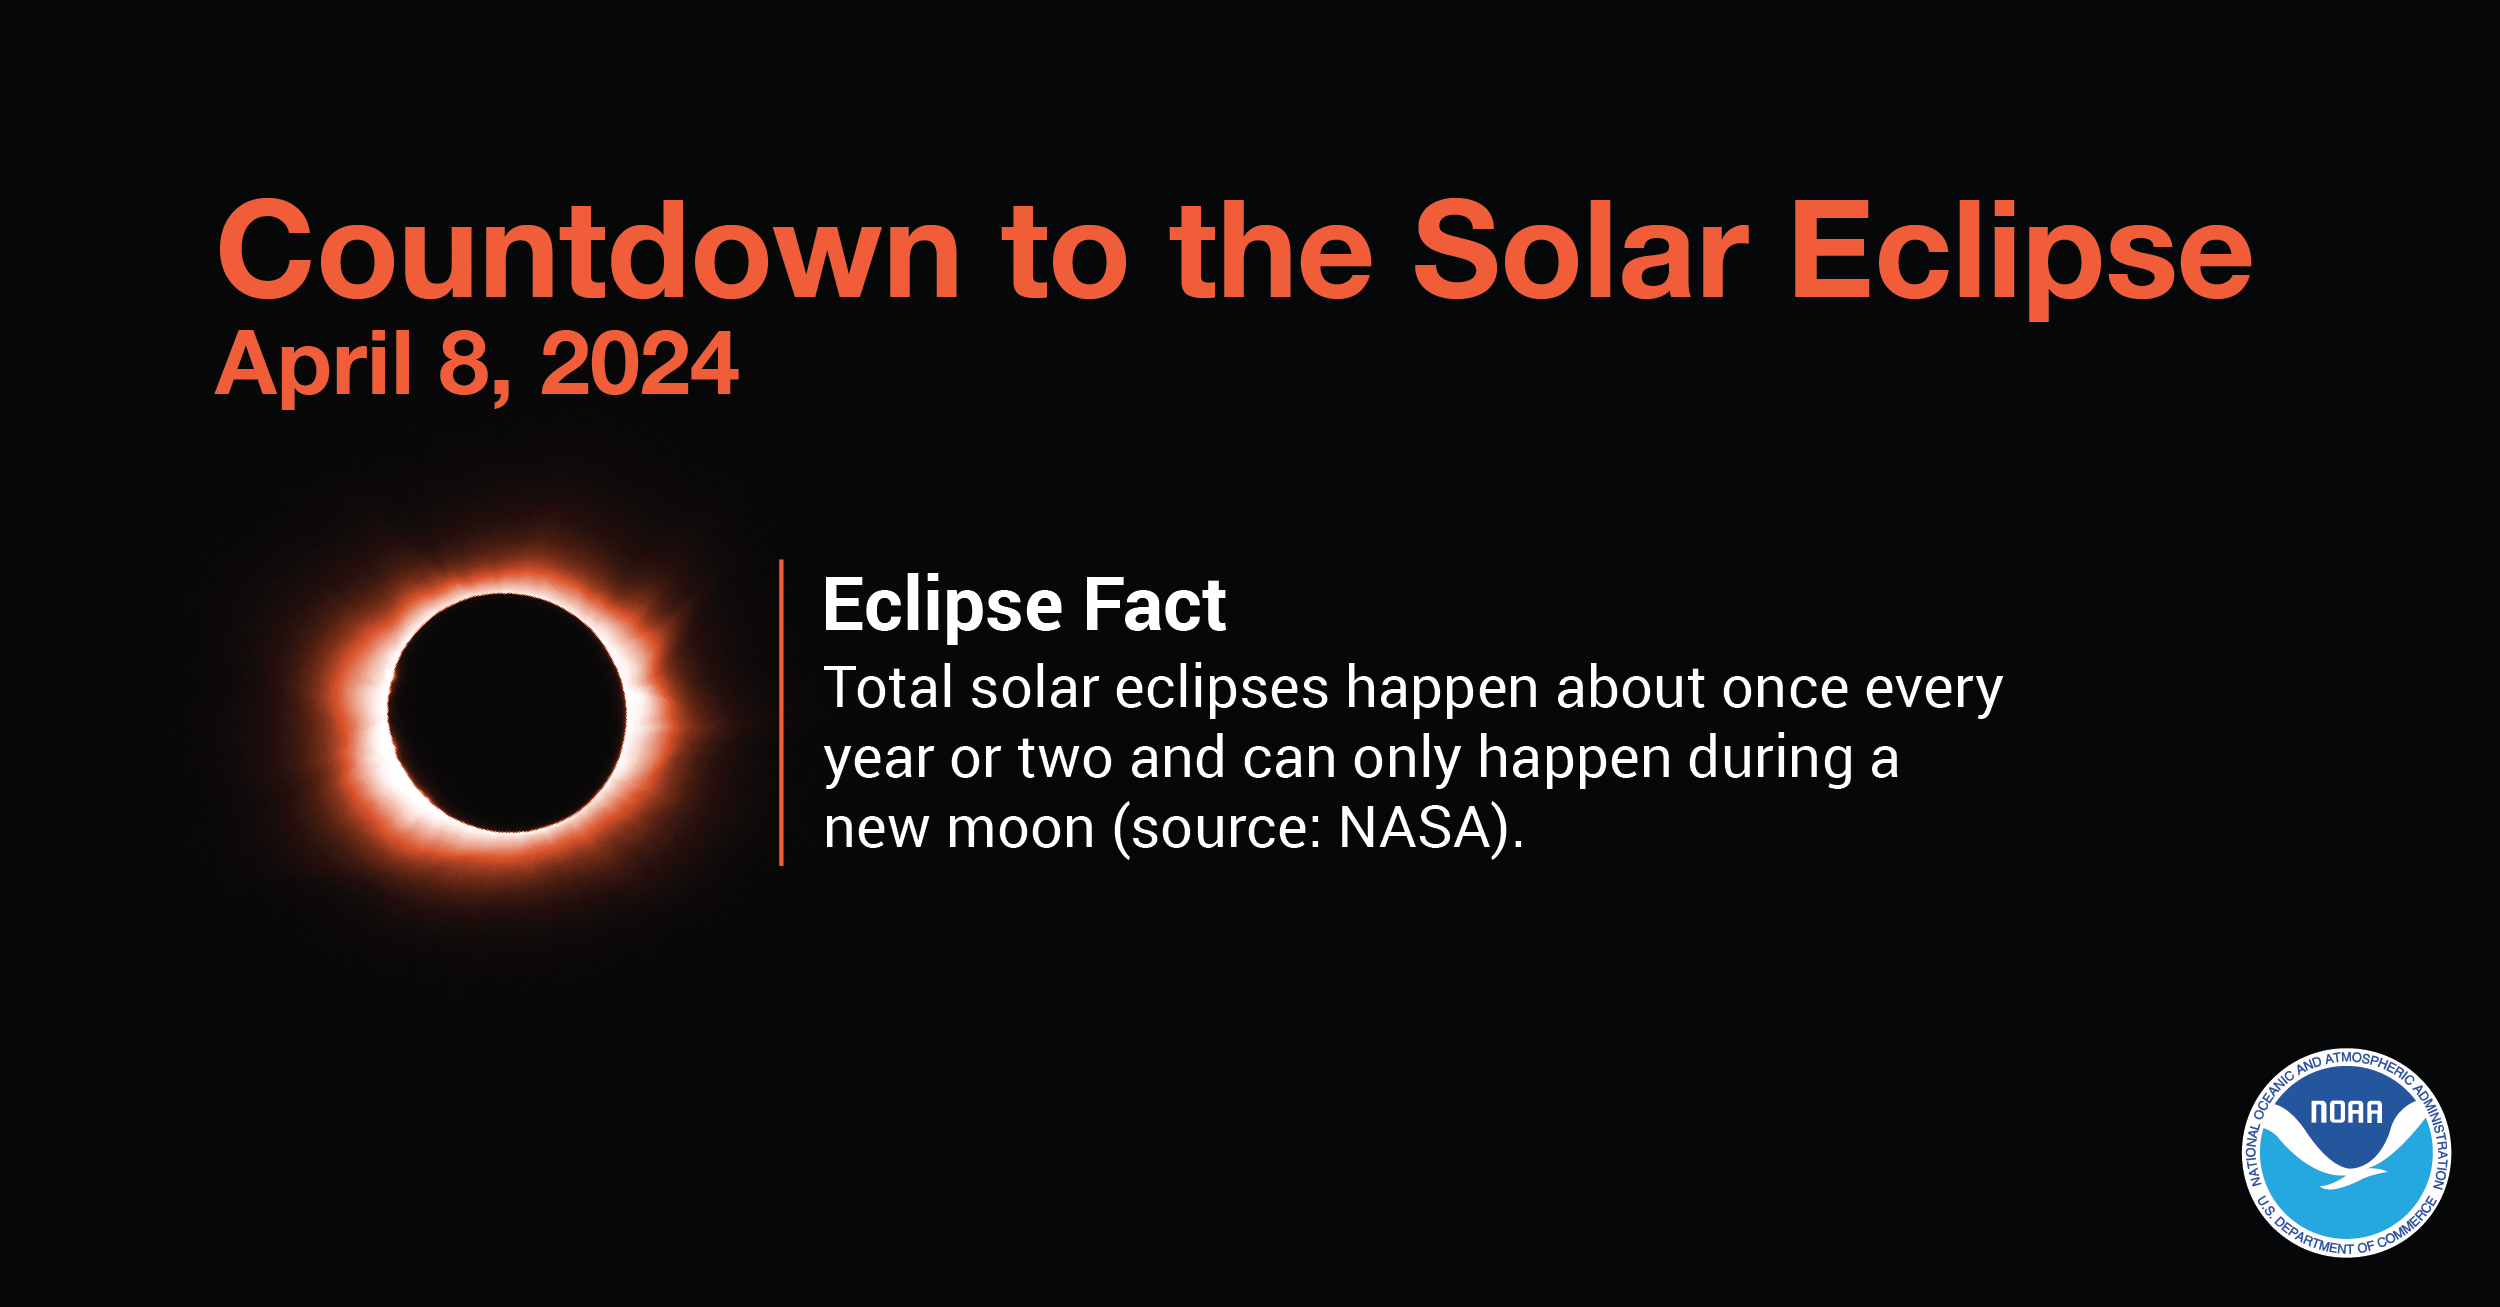 Eclipse Fact 4